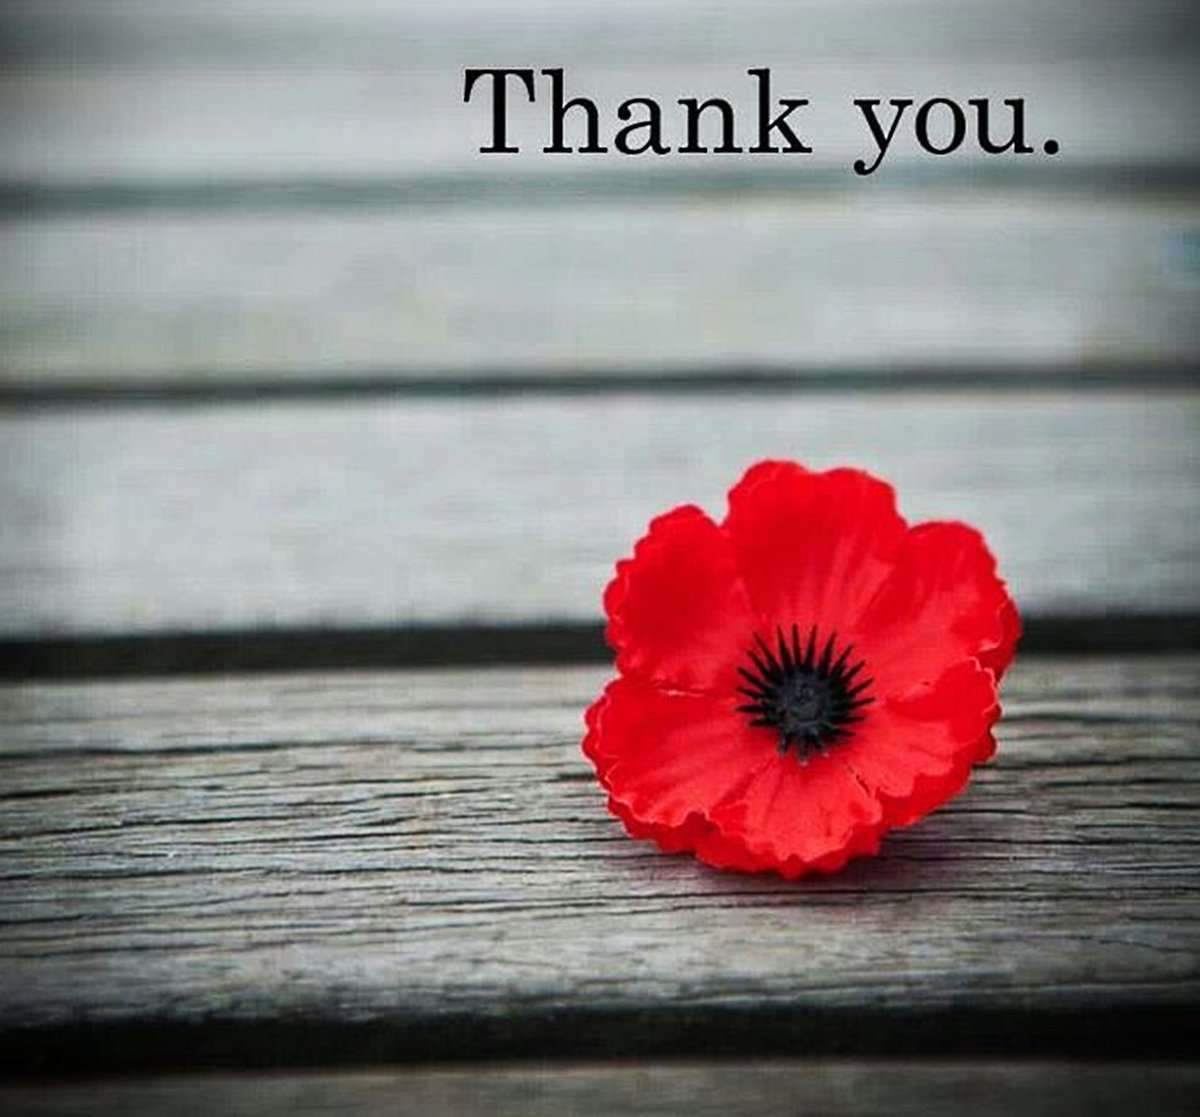 On this Remembrance Day, I honour those who have served and are serving. We are free because of you. #LestWeForget